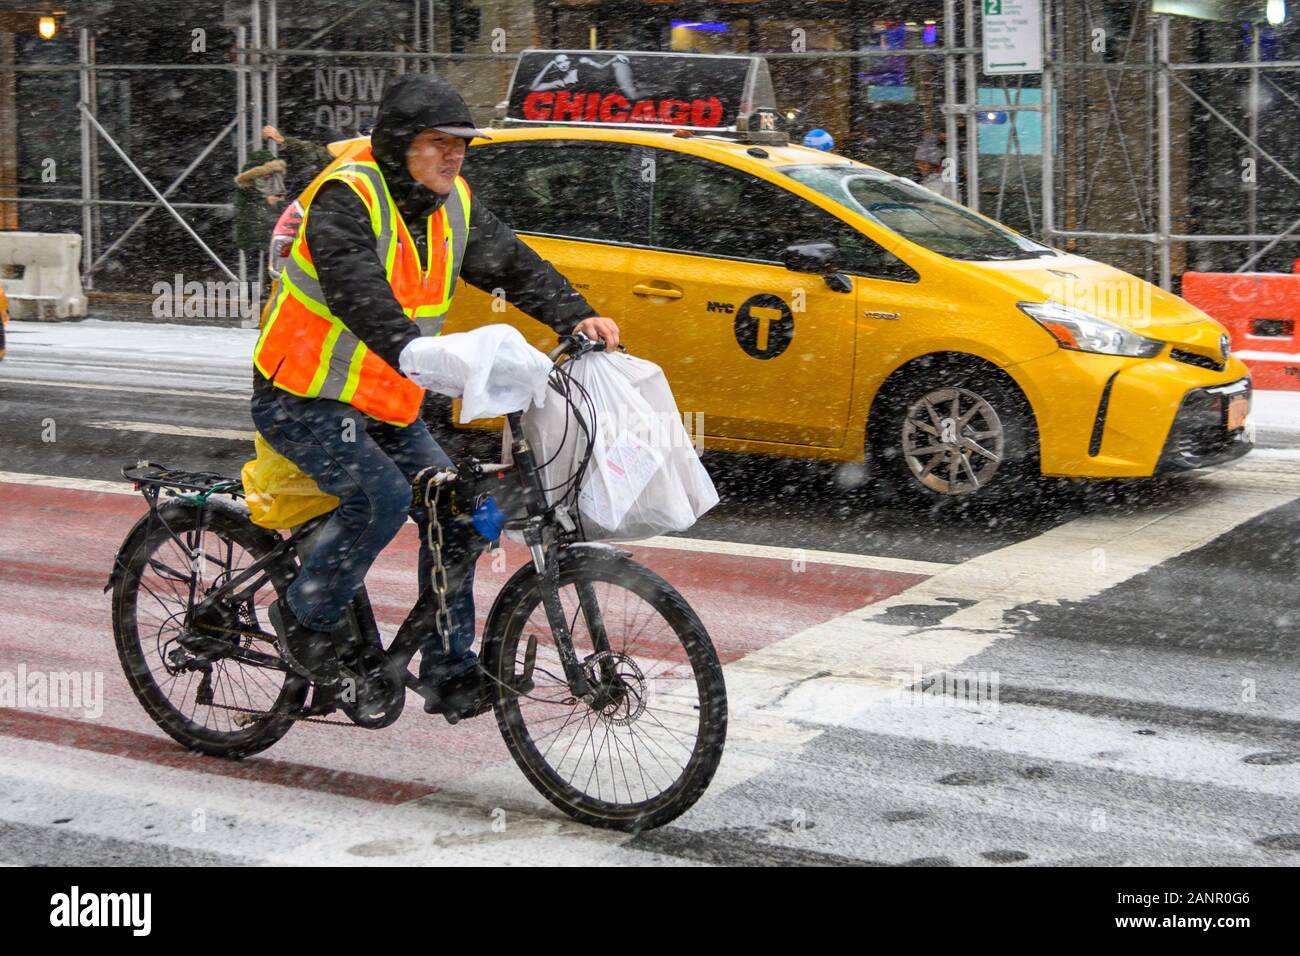 New York, USA,  18 January 2020. A delivery man from a Chinese restaurant works on his bycicle in New York City's Upper East Side during a snowstorm.   Credit: Enrique Shore/Alamy Live News Stock Photo